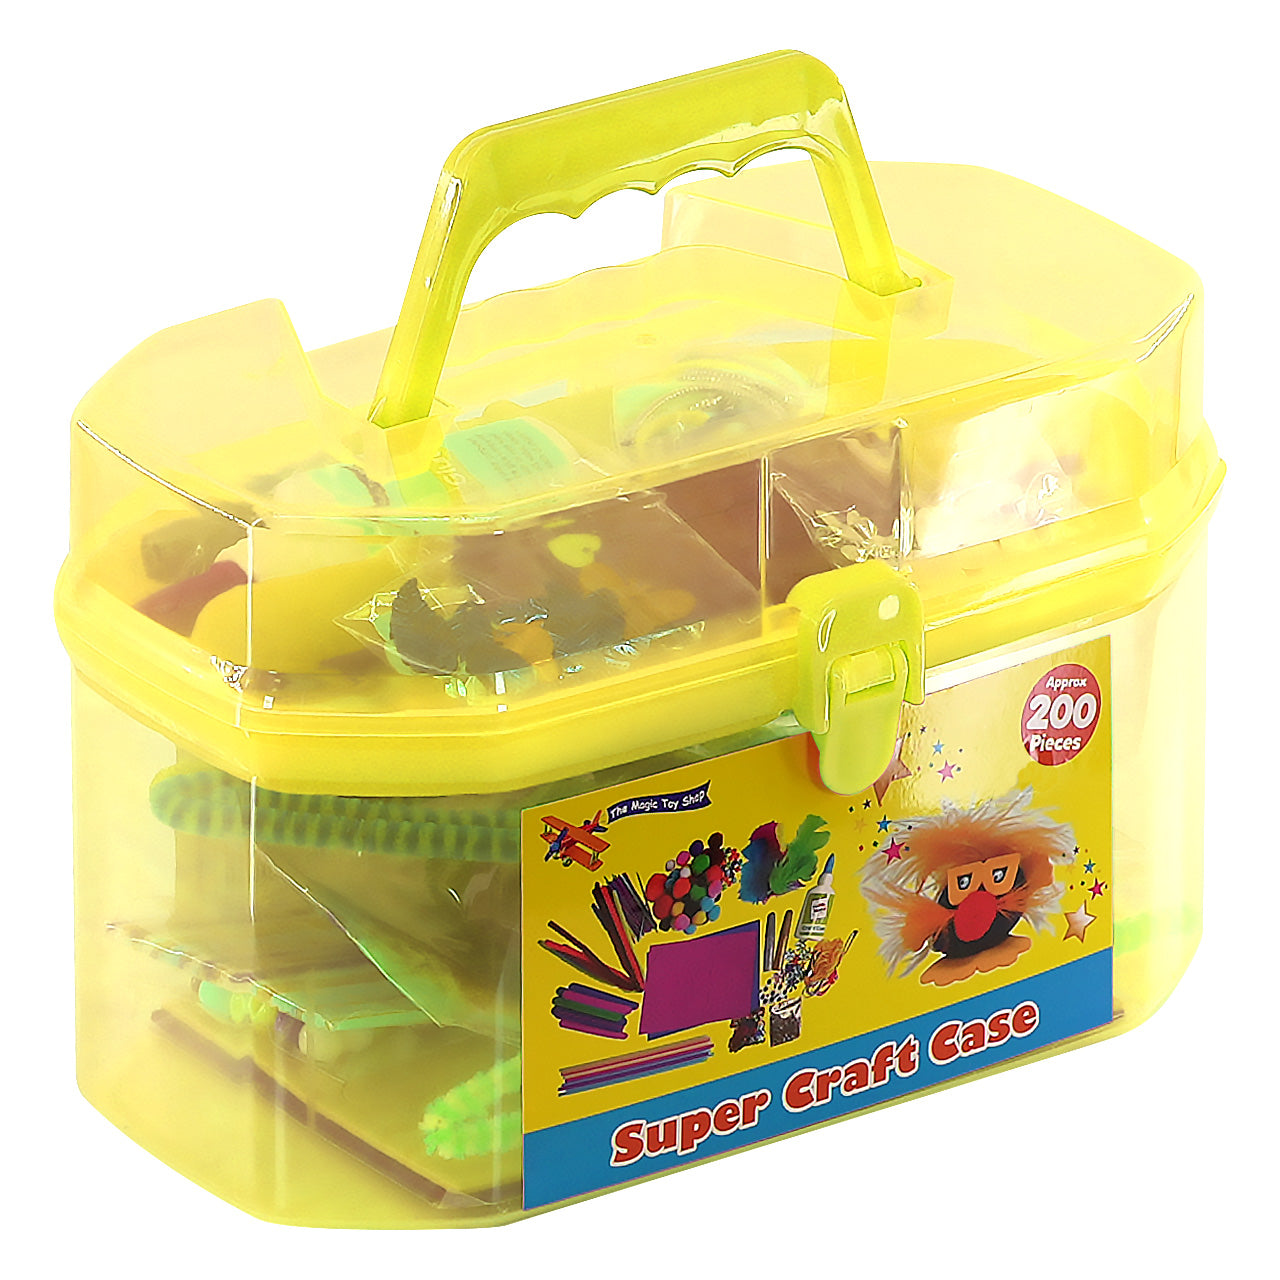 Yellow Kids Super Craft Carry Case The Magic Toy Shop - The Magic Toy Shop